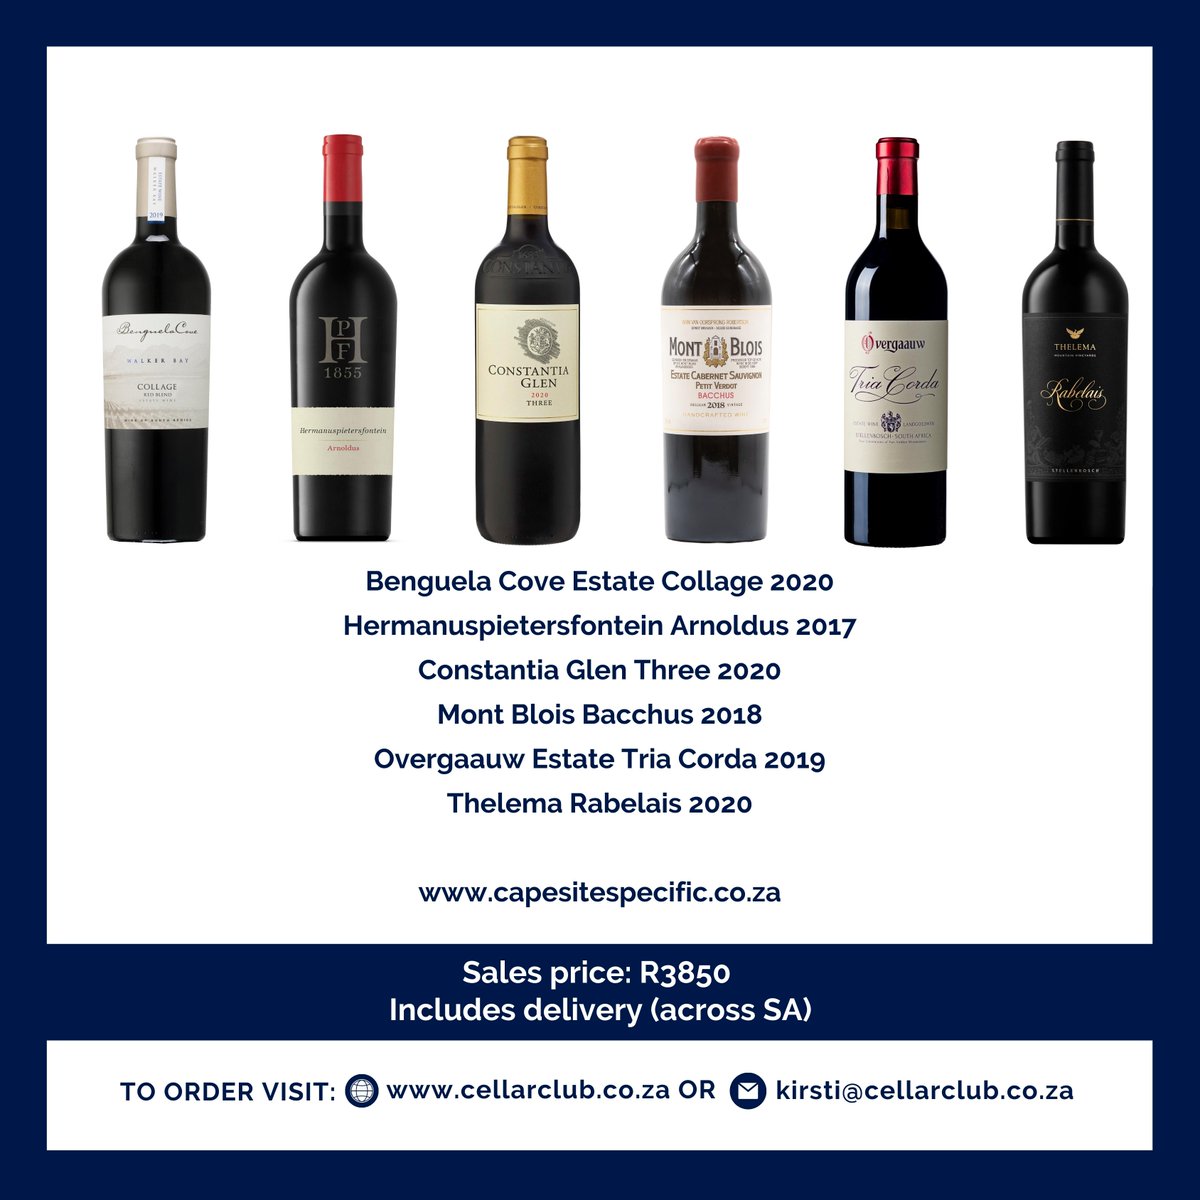 @ThelemaWines collaborated with @capesitespecifi & Cellar Club and curated these bespoke mixed cases! Limited cases are available so do not hesitate to place yours today! @BenguelaCove @ConstantiaGlen @HPF_Skapie @MontBlois